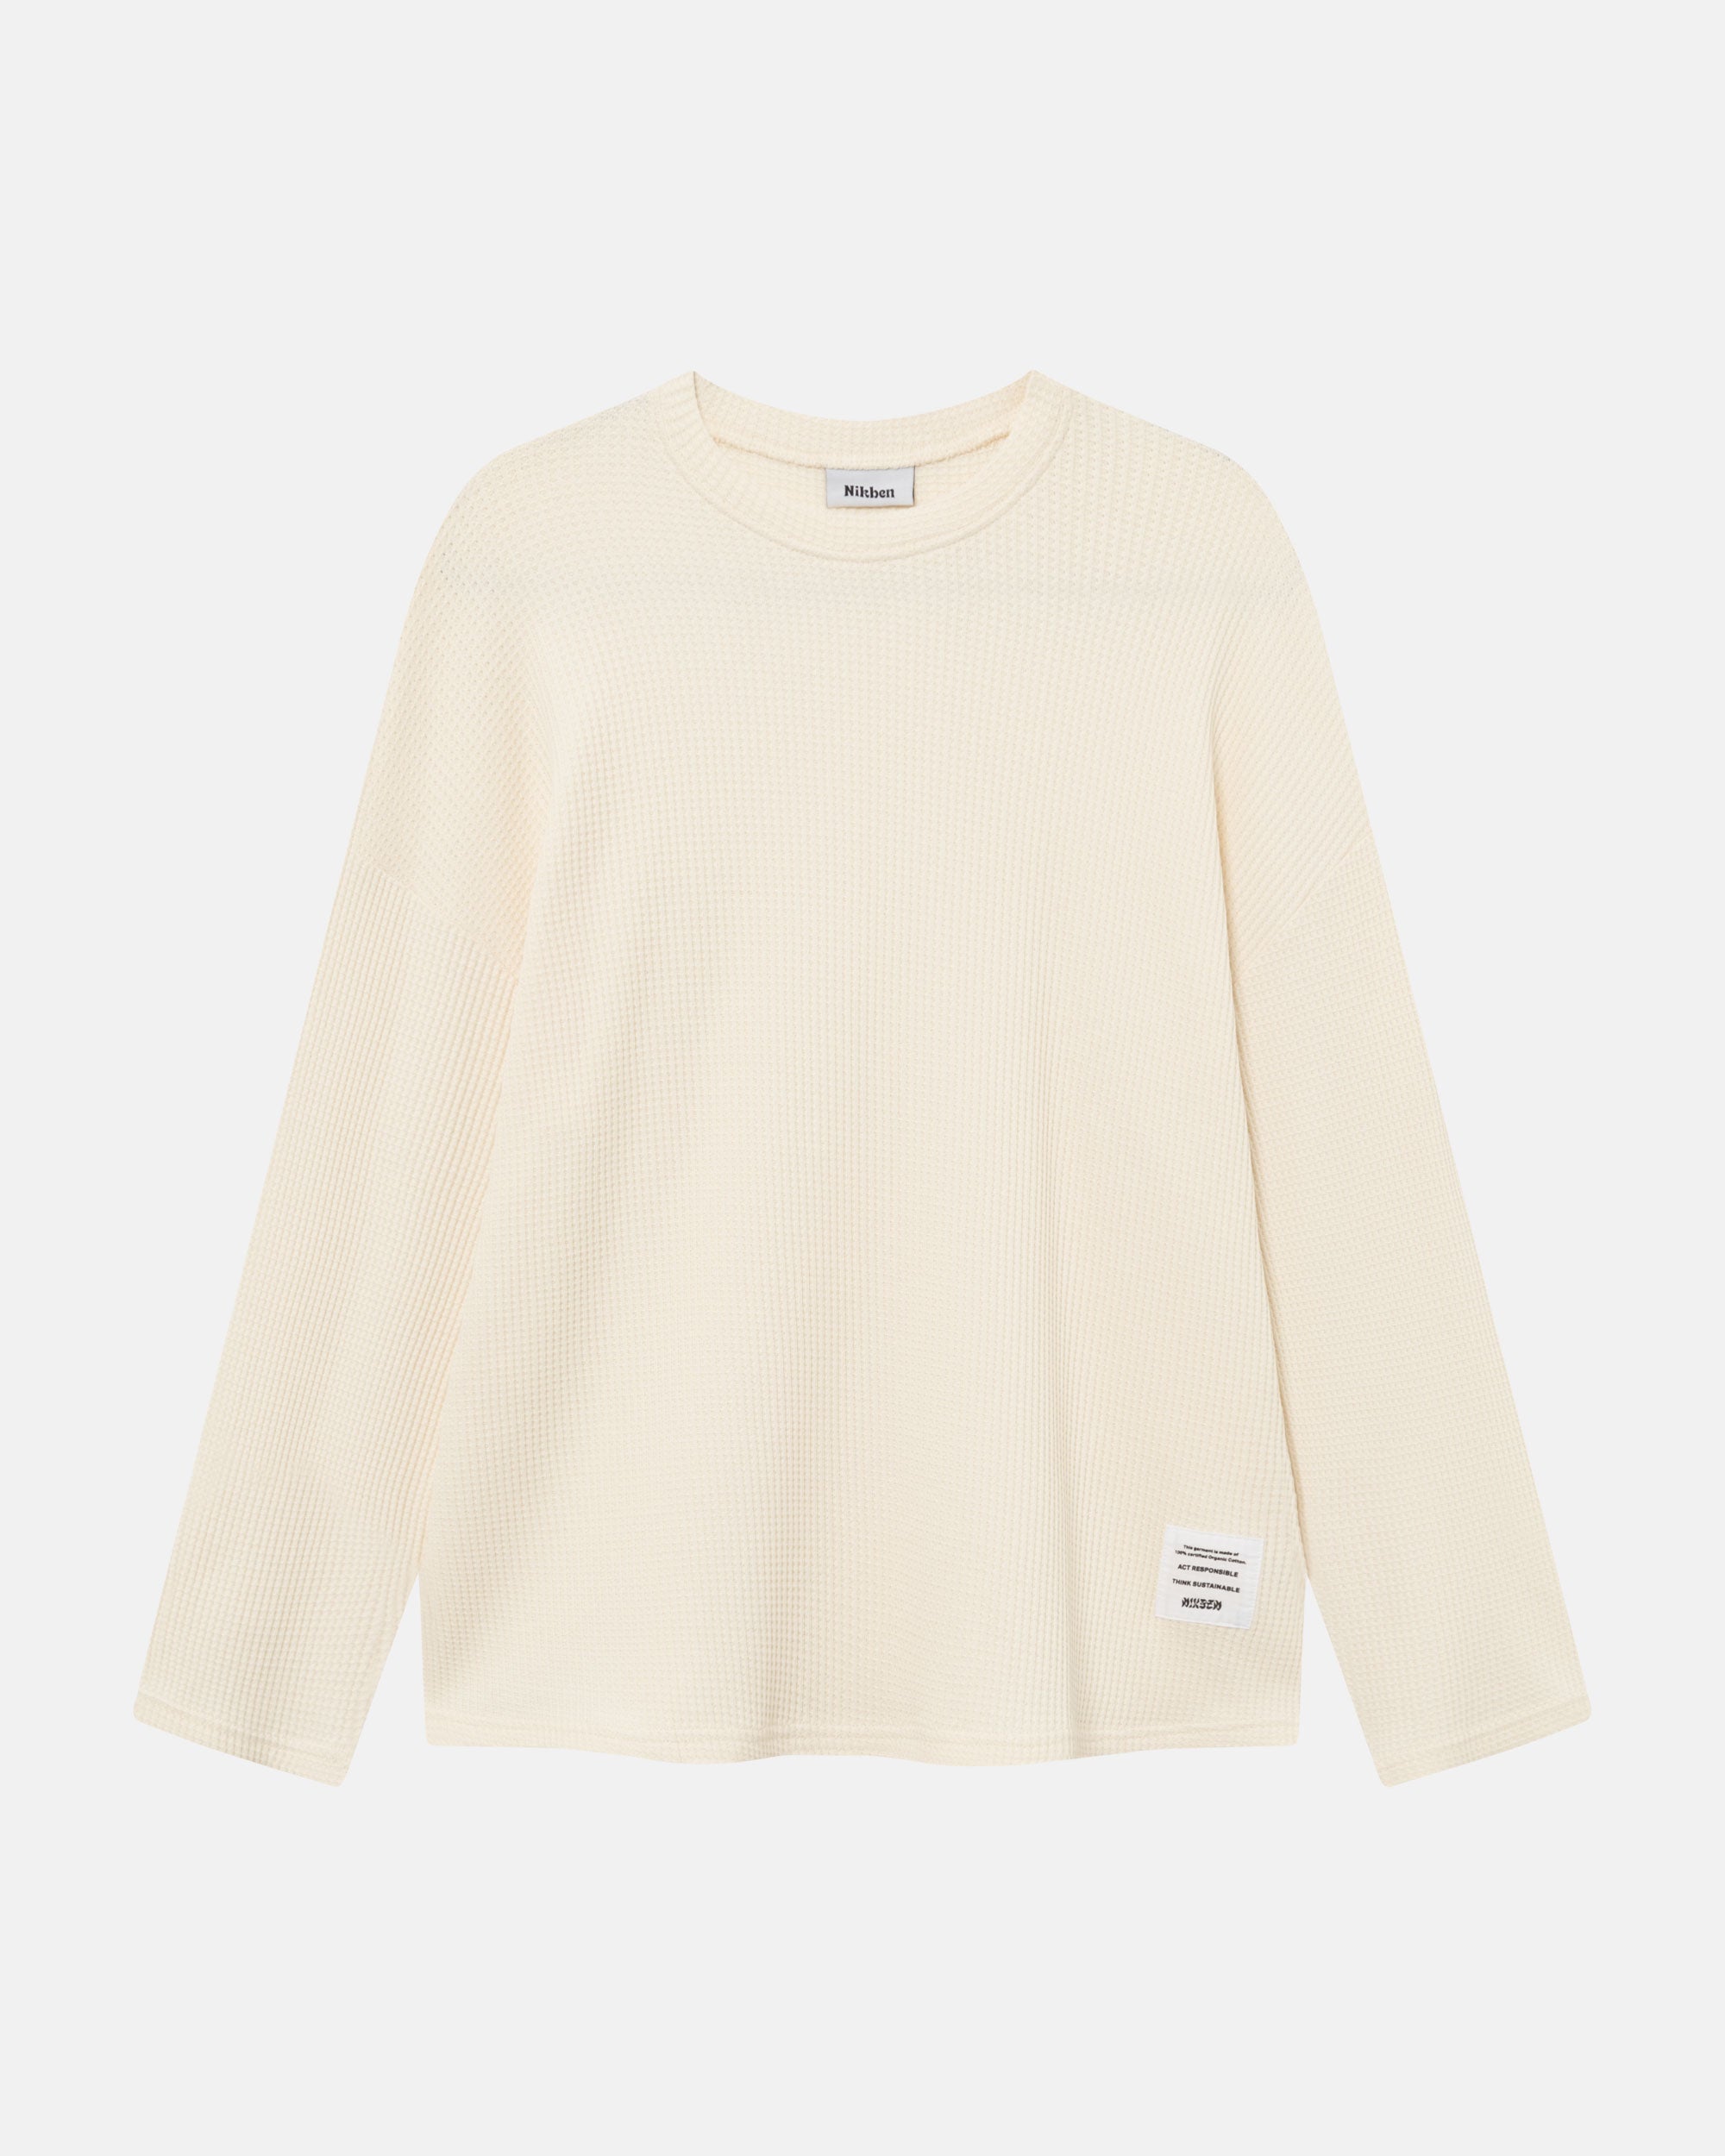 Off-white waffle-patterned sweatshirt with a stitched-on material label.